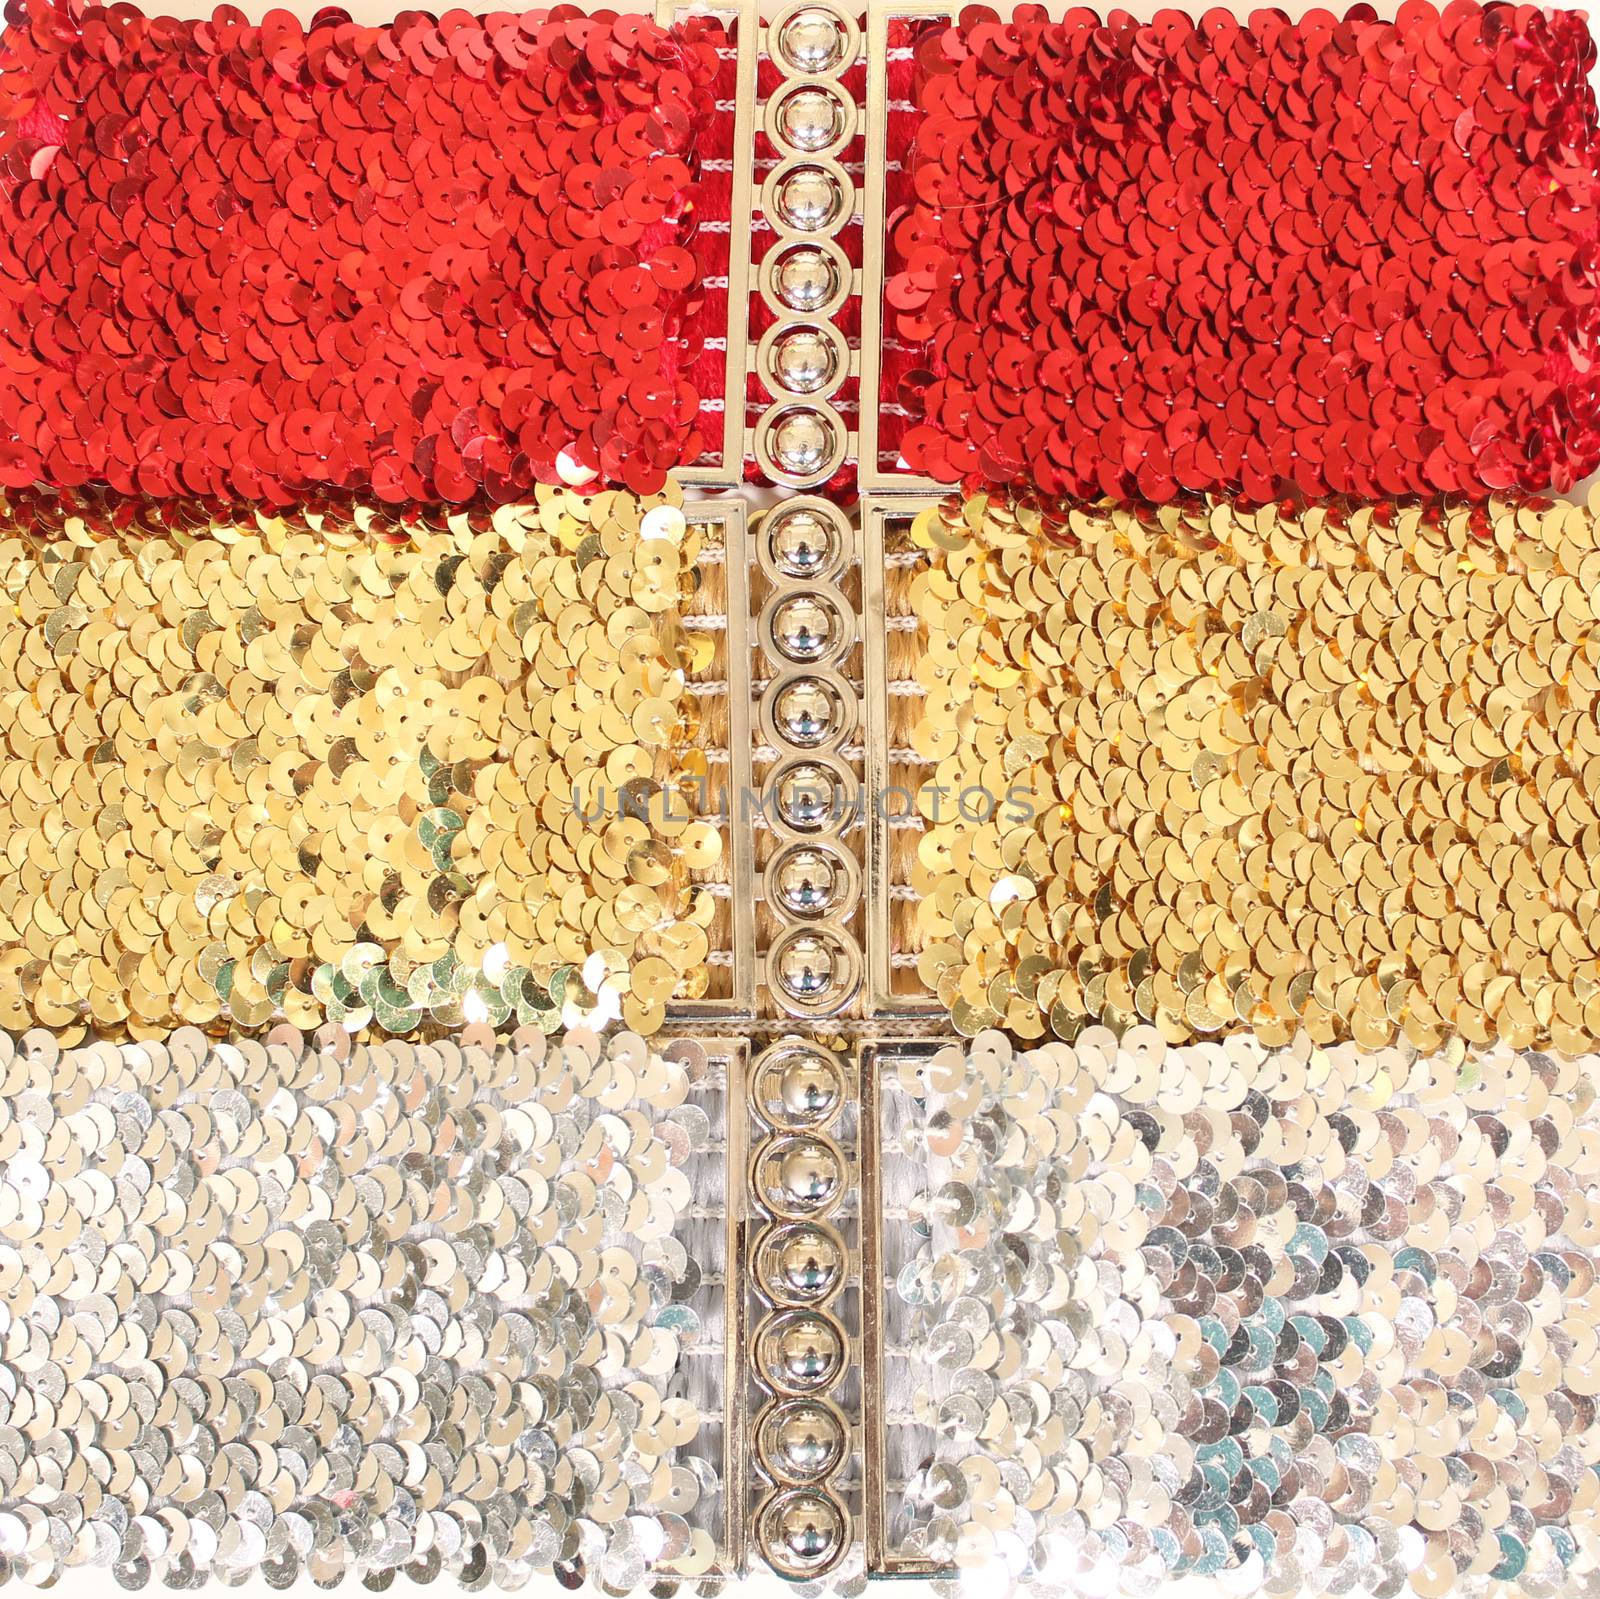 Belts With Sequins Red, Gold and Silver by Marti157900